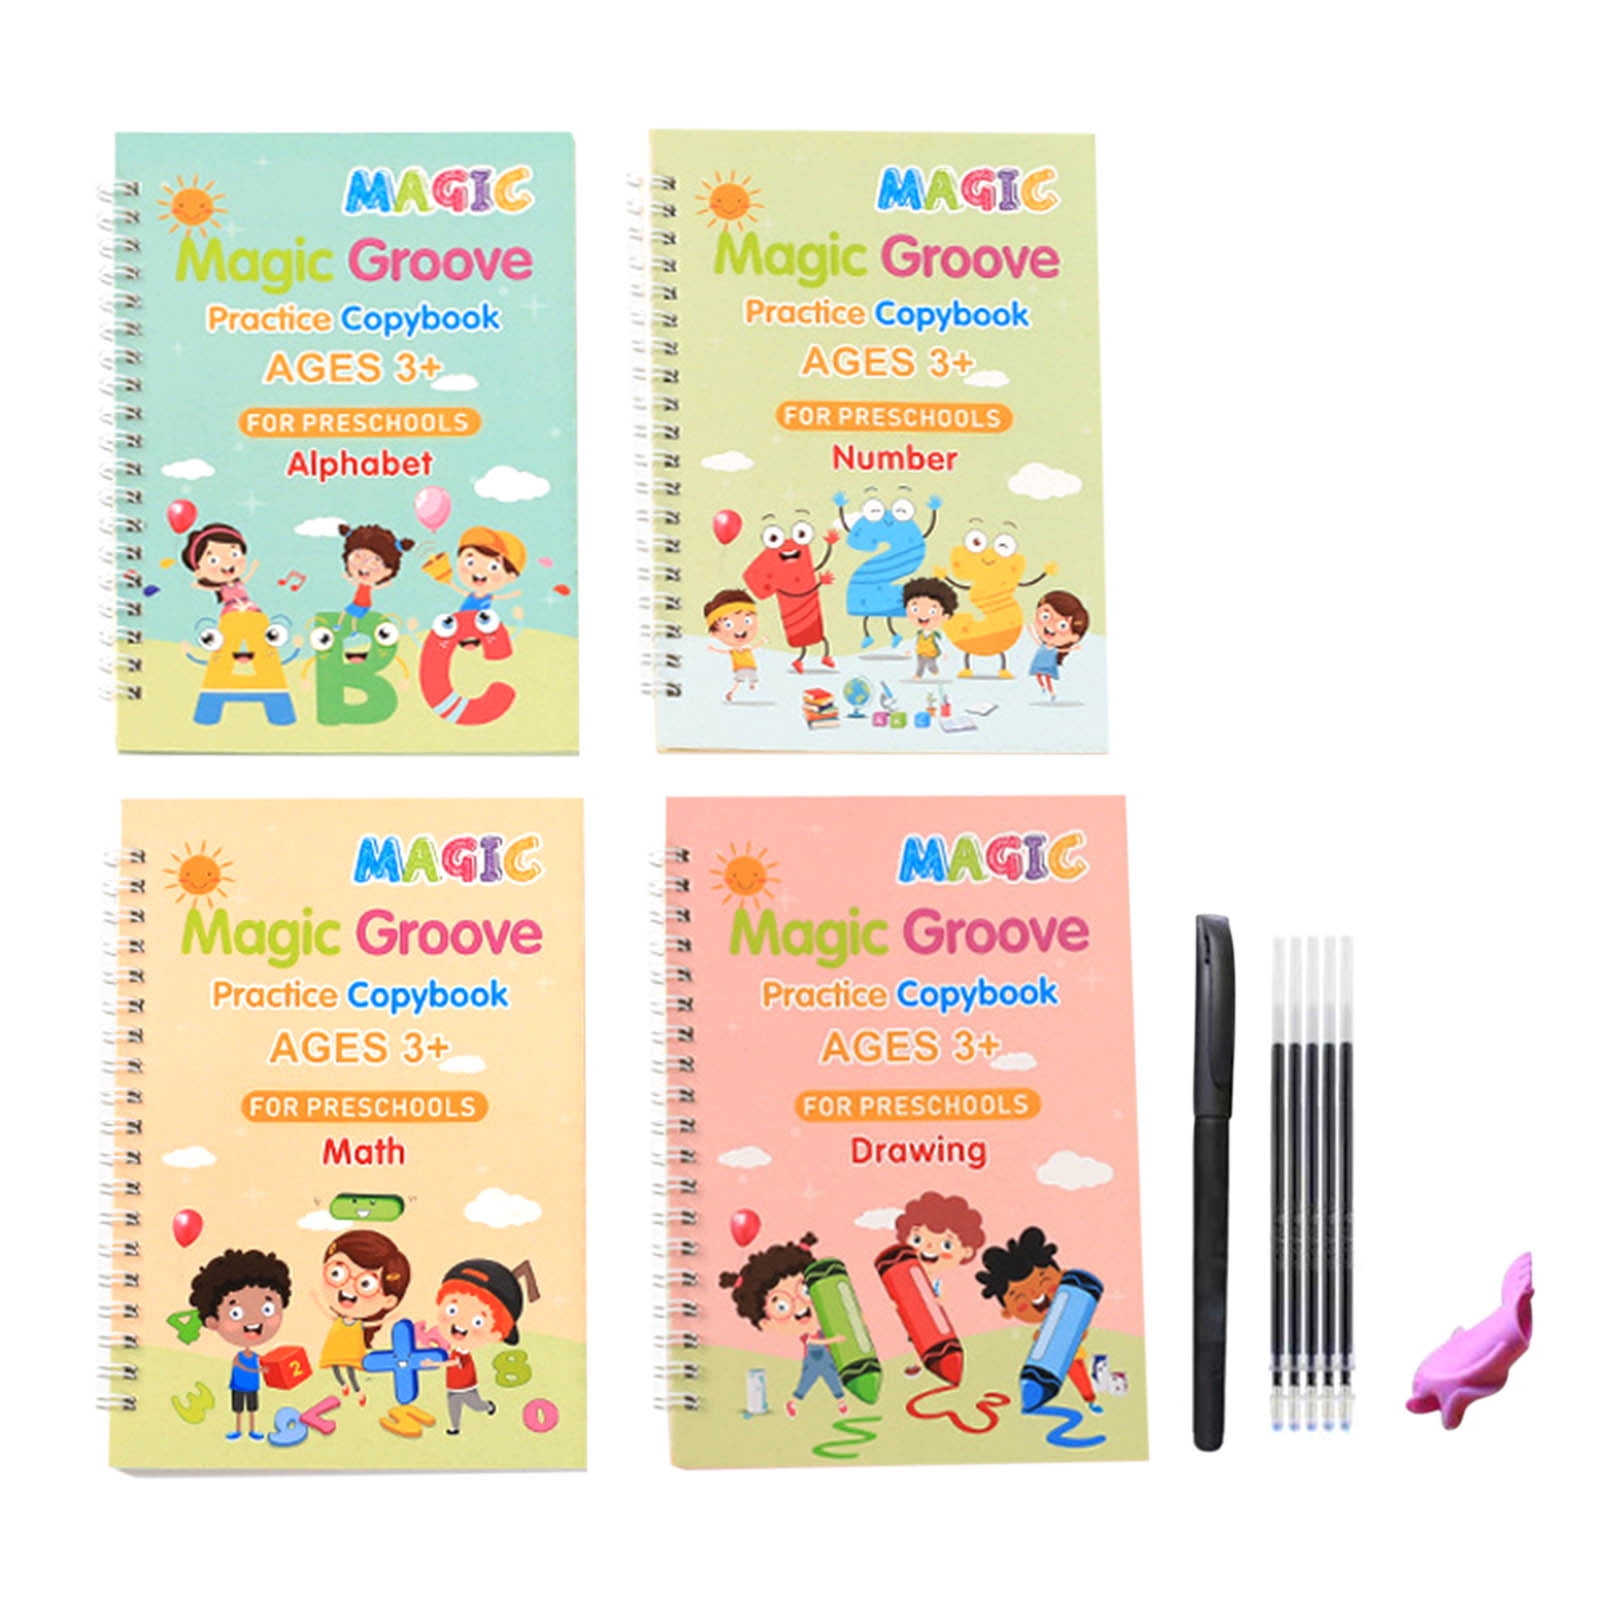 QianShouYan Large Size Magic Practice Copybooks for Kids Reusable Handwriting Workbooks for Preschools Grooves Template Design and Handwriting Aid